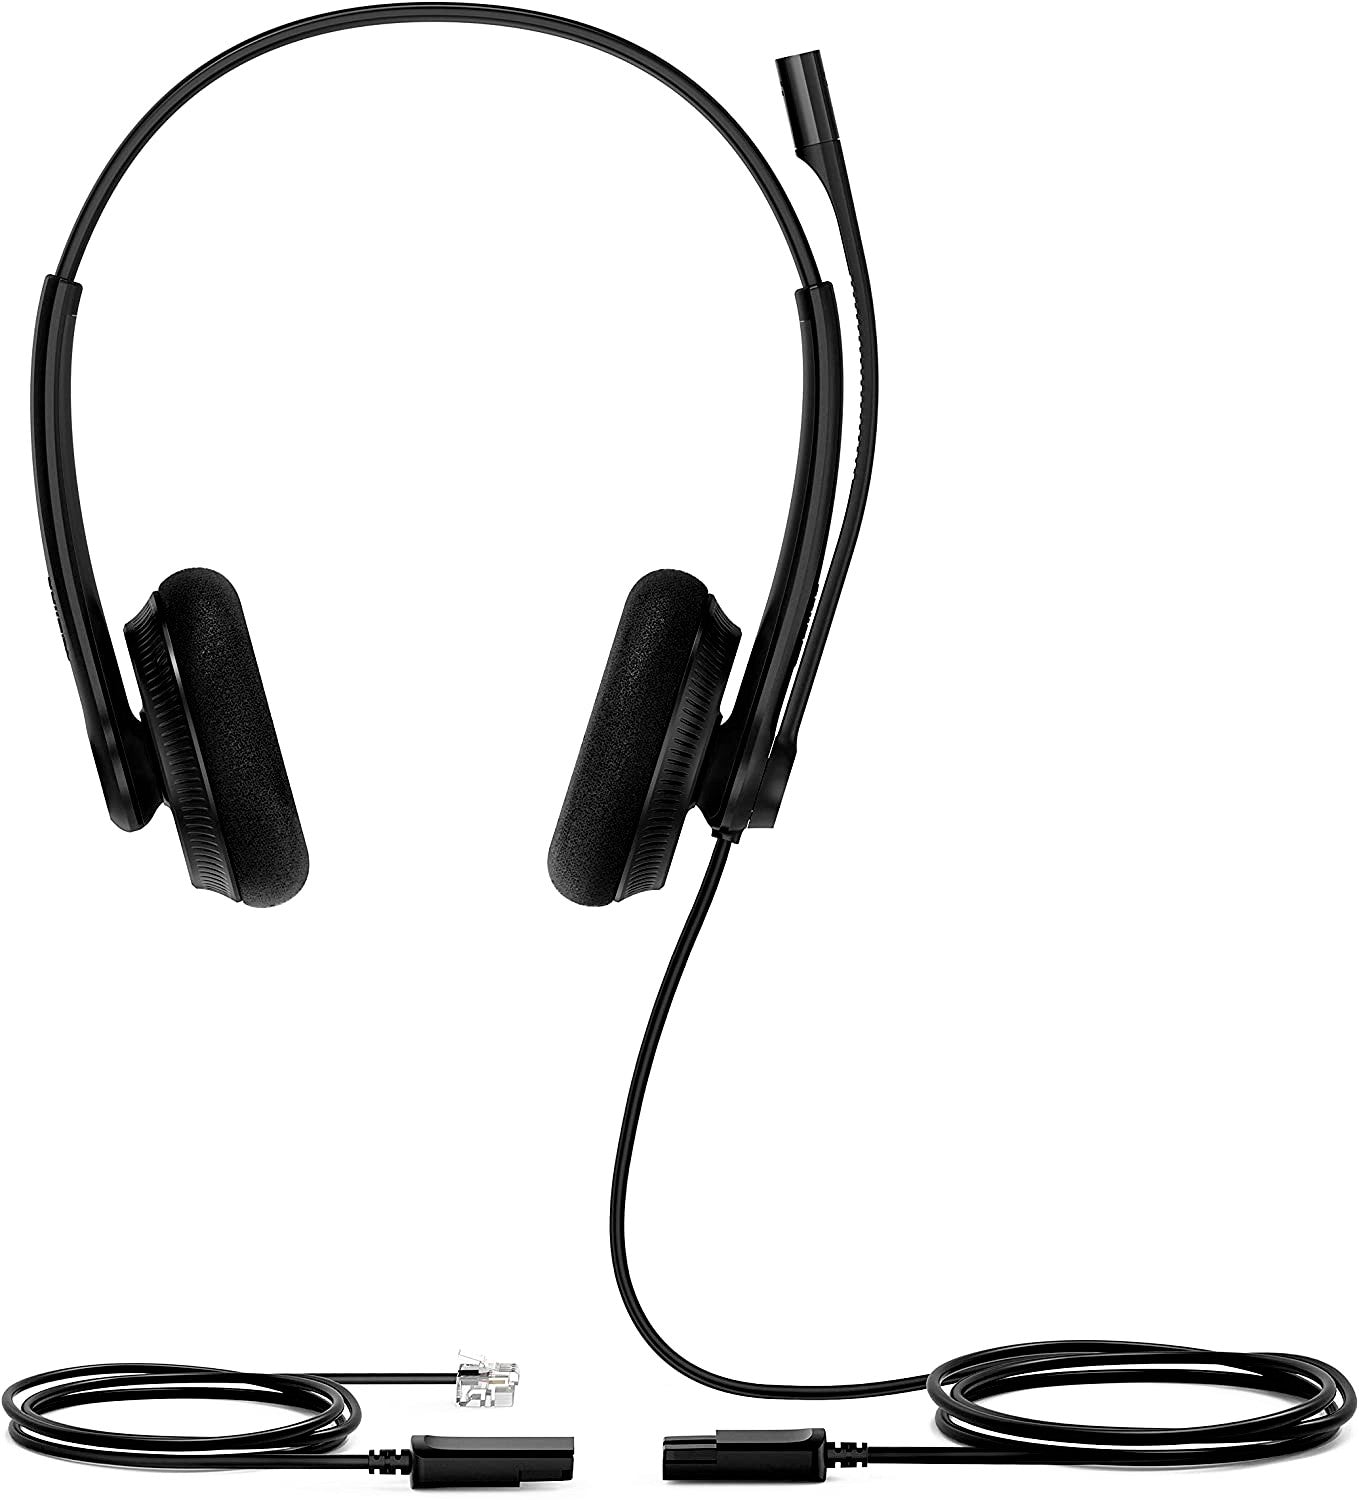 Yealink Headset with Microphone RJ9 for Voip Phone Wired Headset Teams Certified YHS34 YHS33 Noise Cancelling with Mic (YHS34-Lite-DUAL, Black)